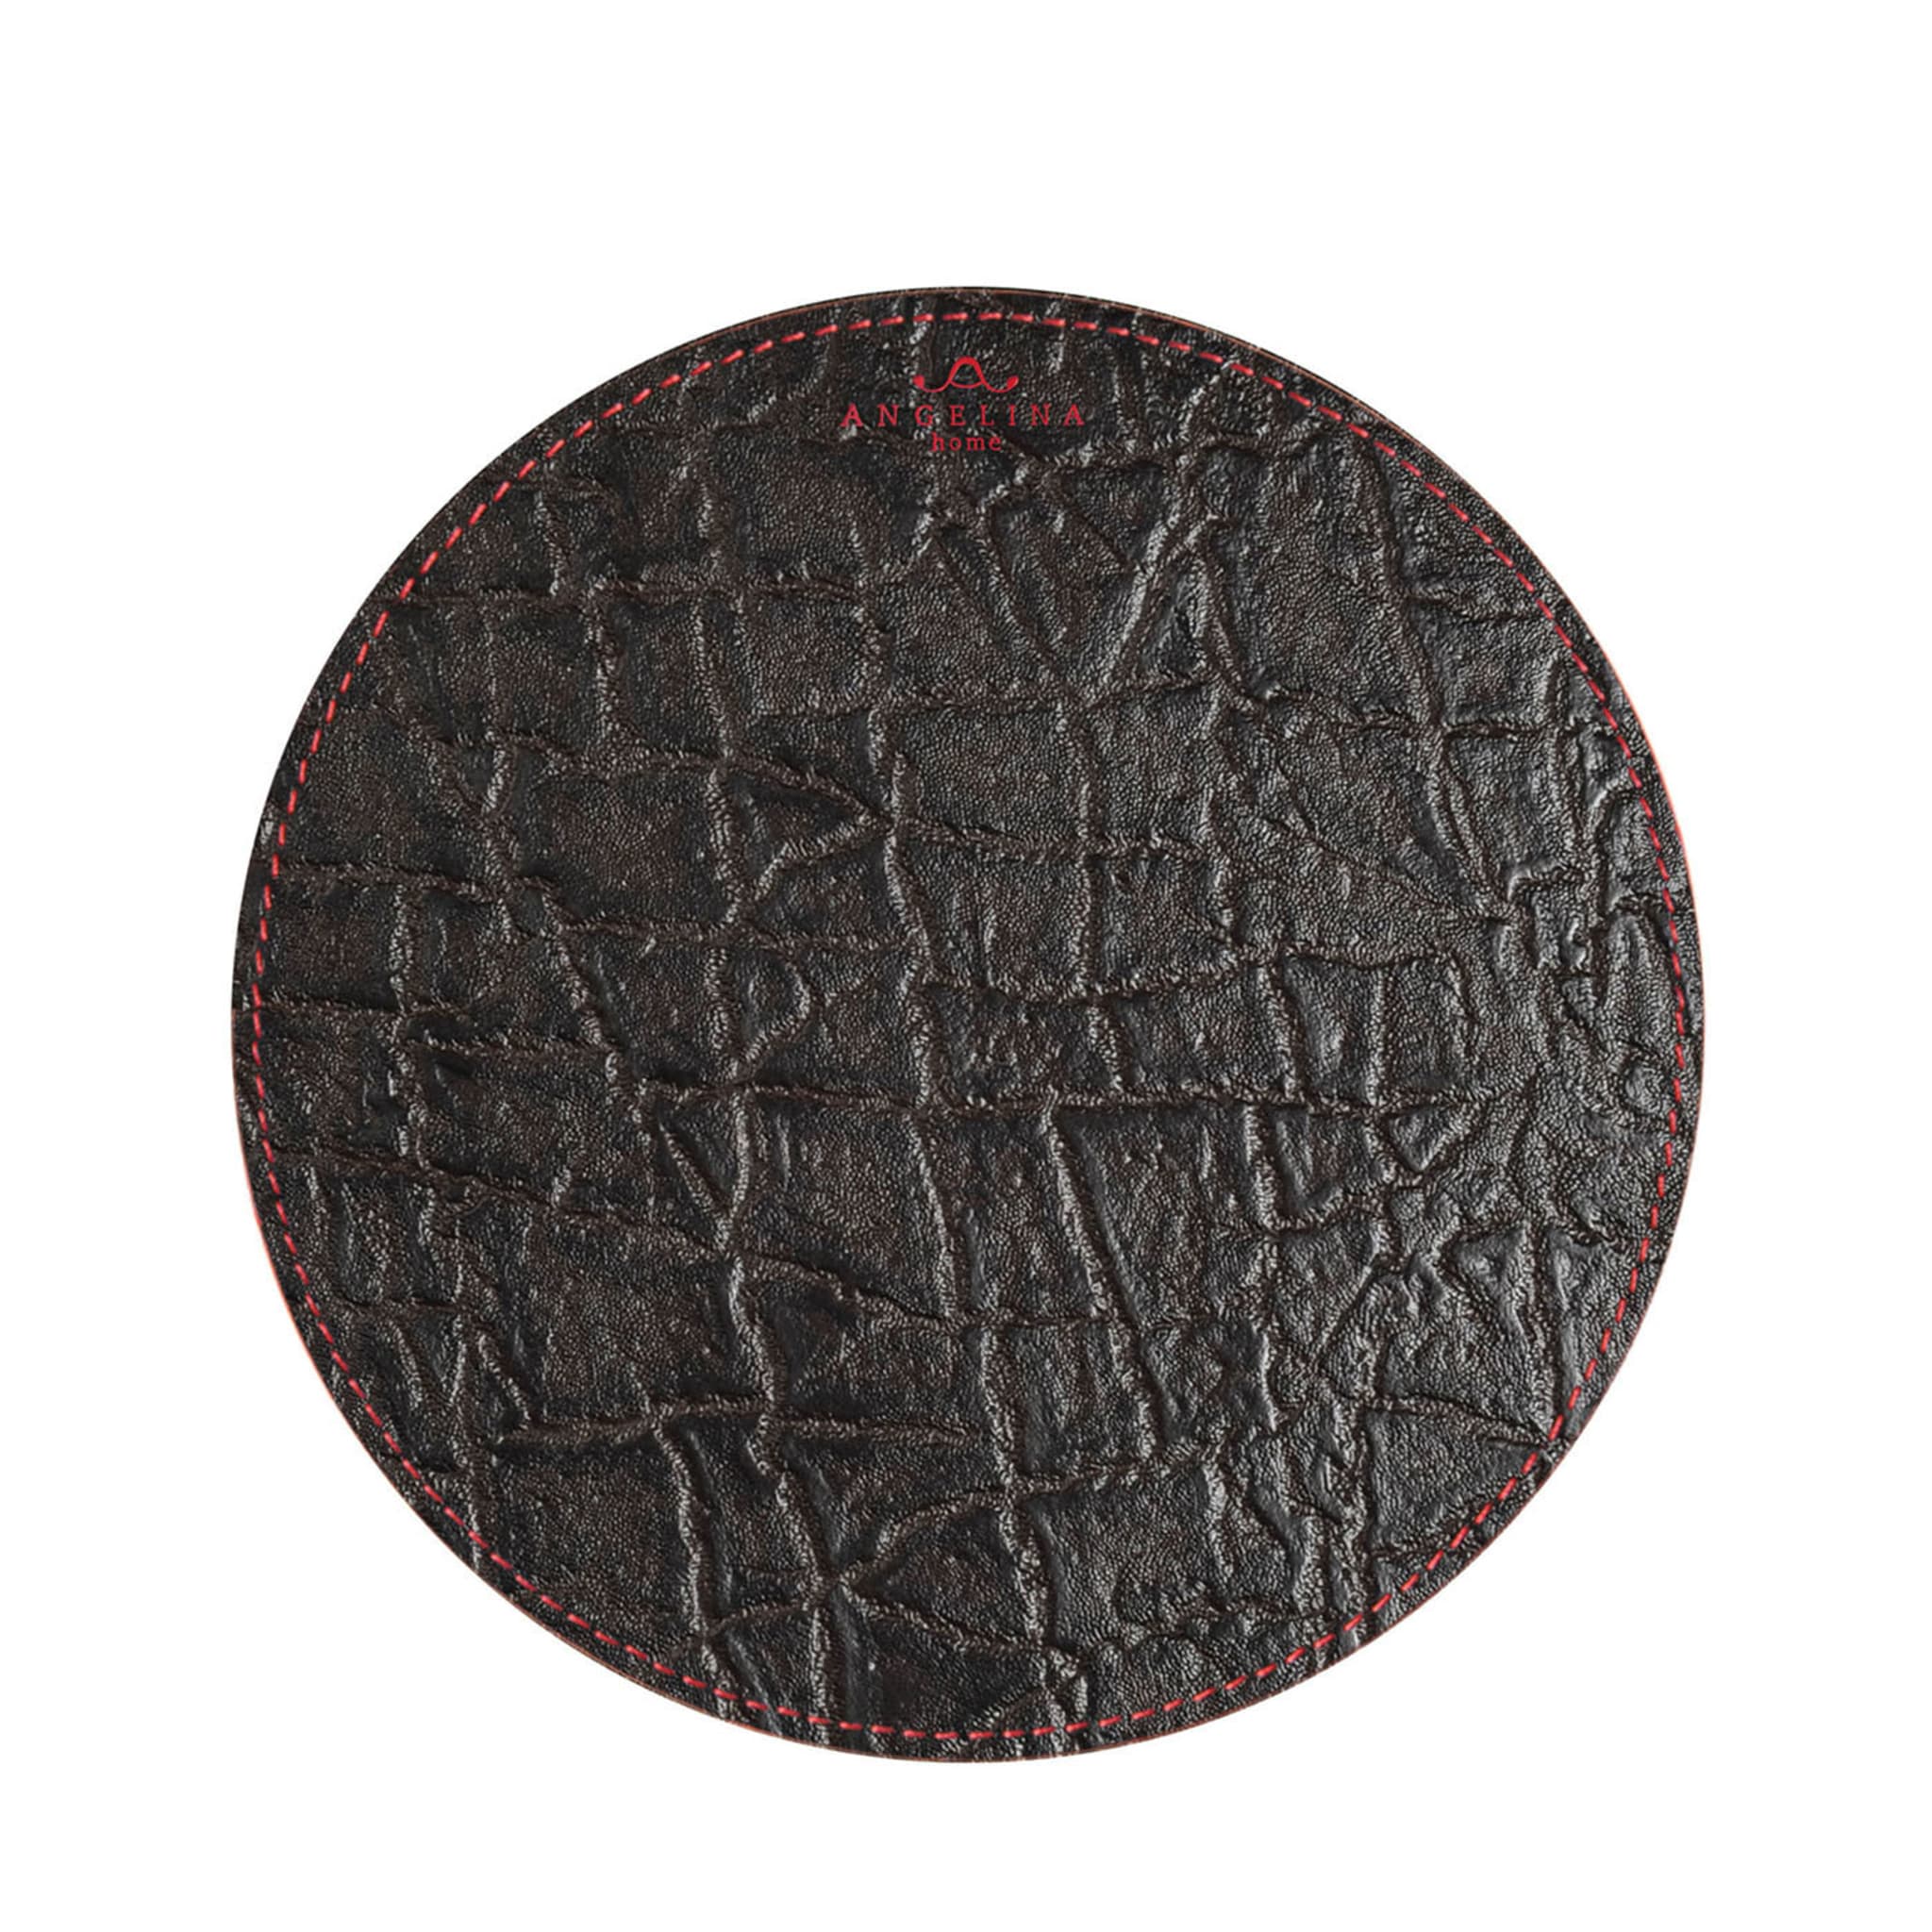 Tanzania Small Set of 2 Round Black Leather Placemats - Alternative view 2